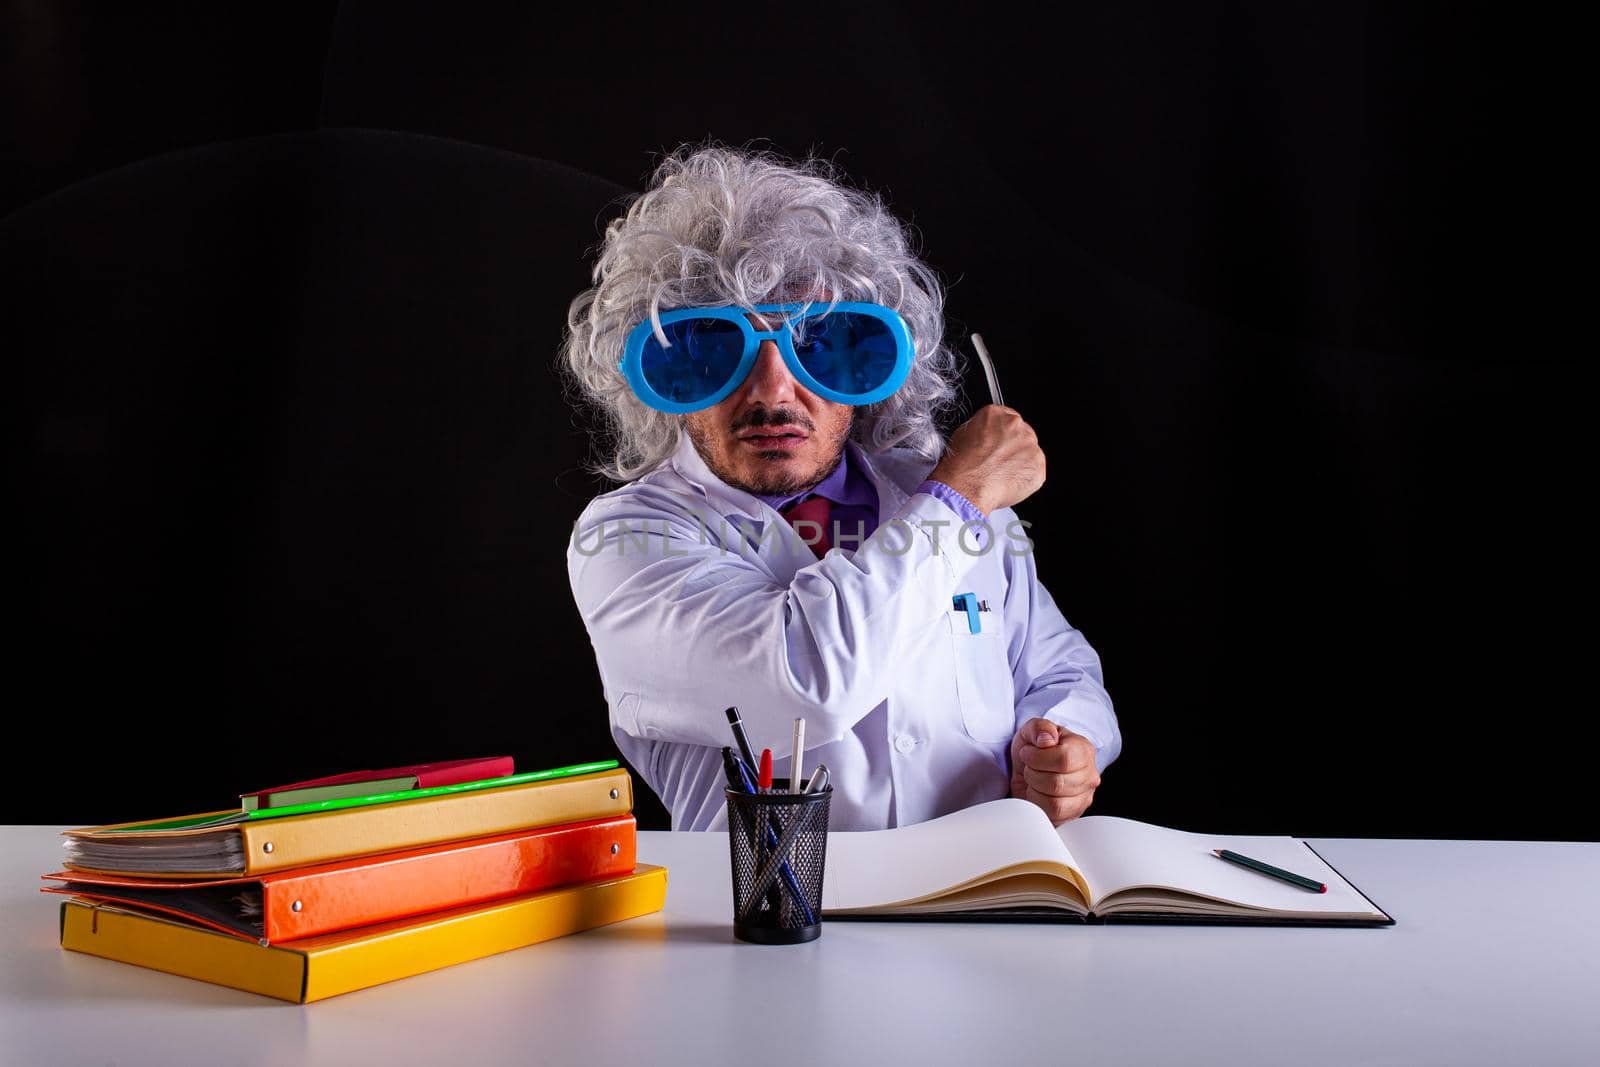 Crazy science teacher in white coat with unkempt hair in funny eye glasses sitting at the desk holding a wand to point at the blackboard